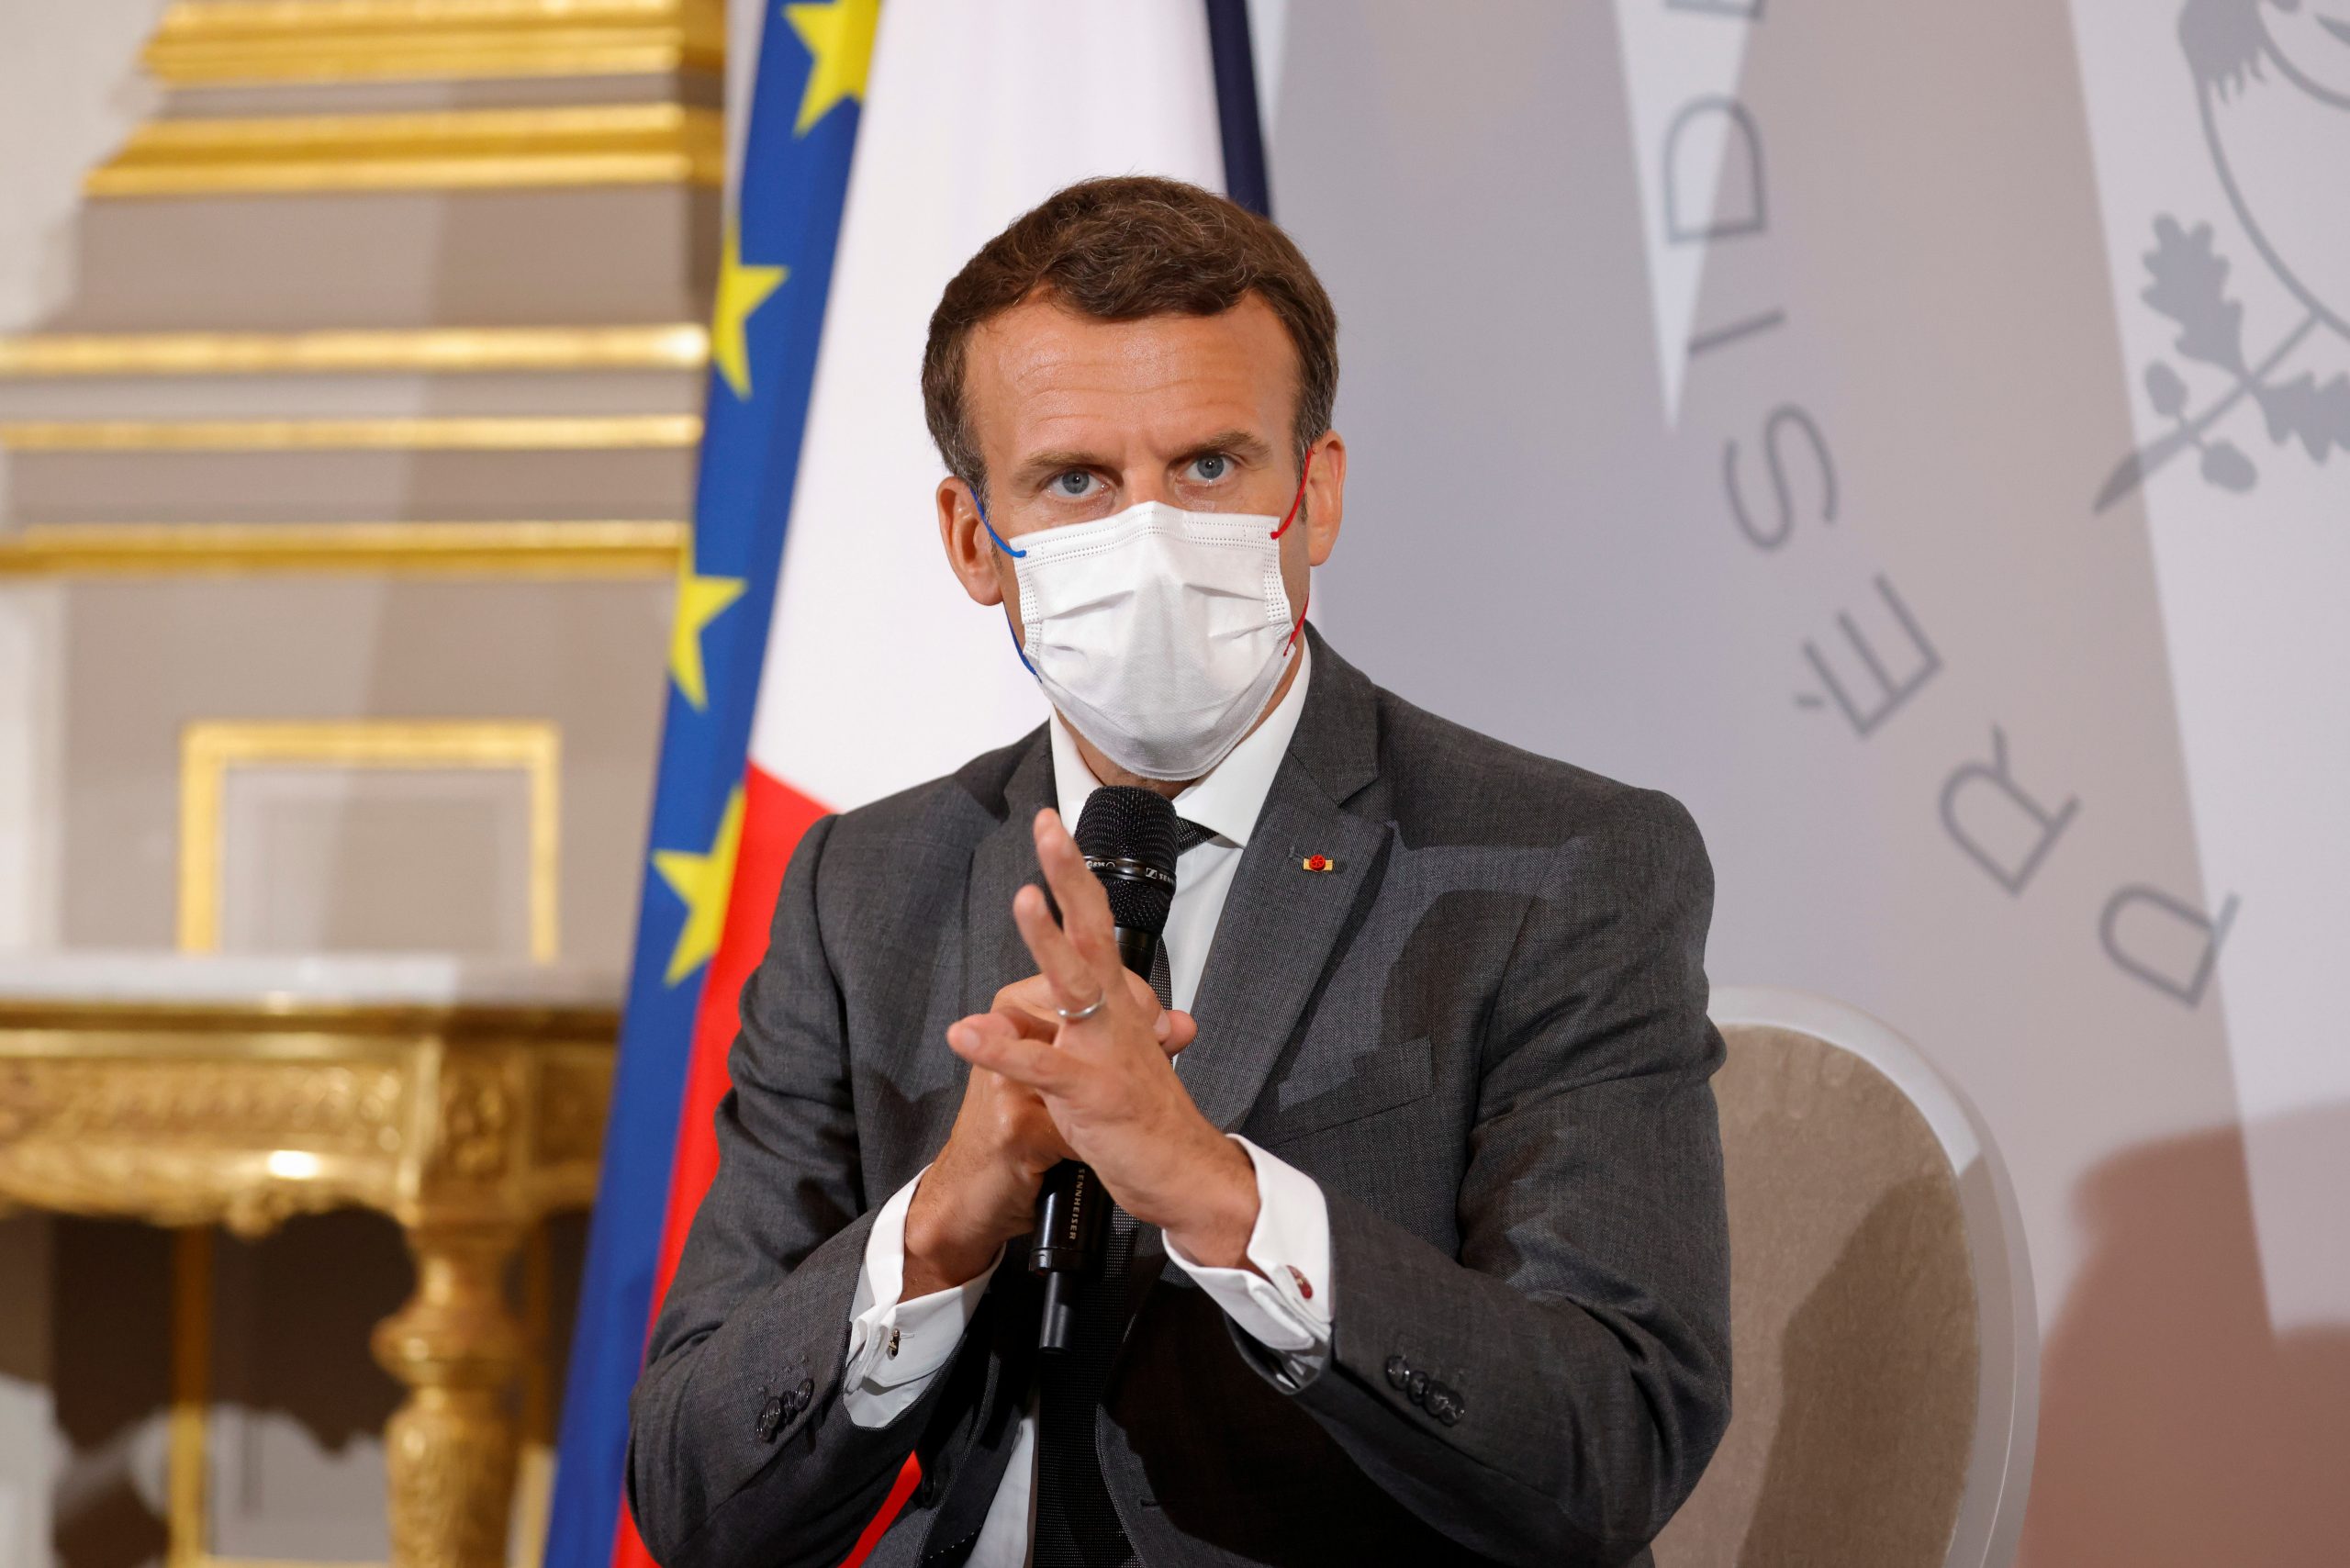 epa09258284 French President Emmanuel Macron attends a meeting with NGO representatives ahead of the G7 Summit, at the Elysee Palace in Paris, France, 09 June 2021. The 47th G7 will be held in Britain from 11 to 13 June.  EPA/PASCAL ROSSIGNOL / POOL  MAXPPP OUT